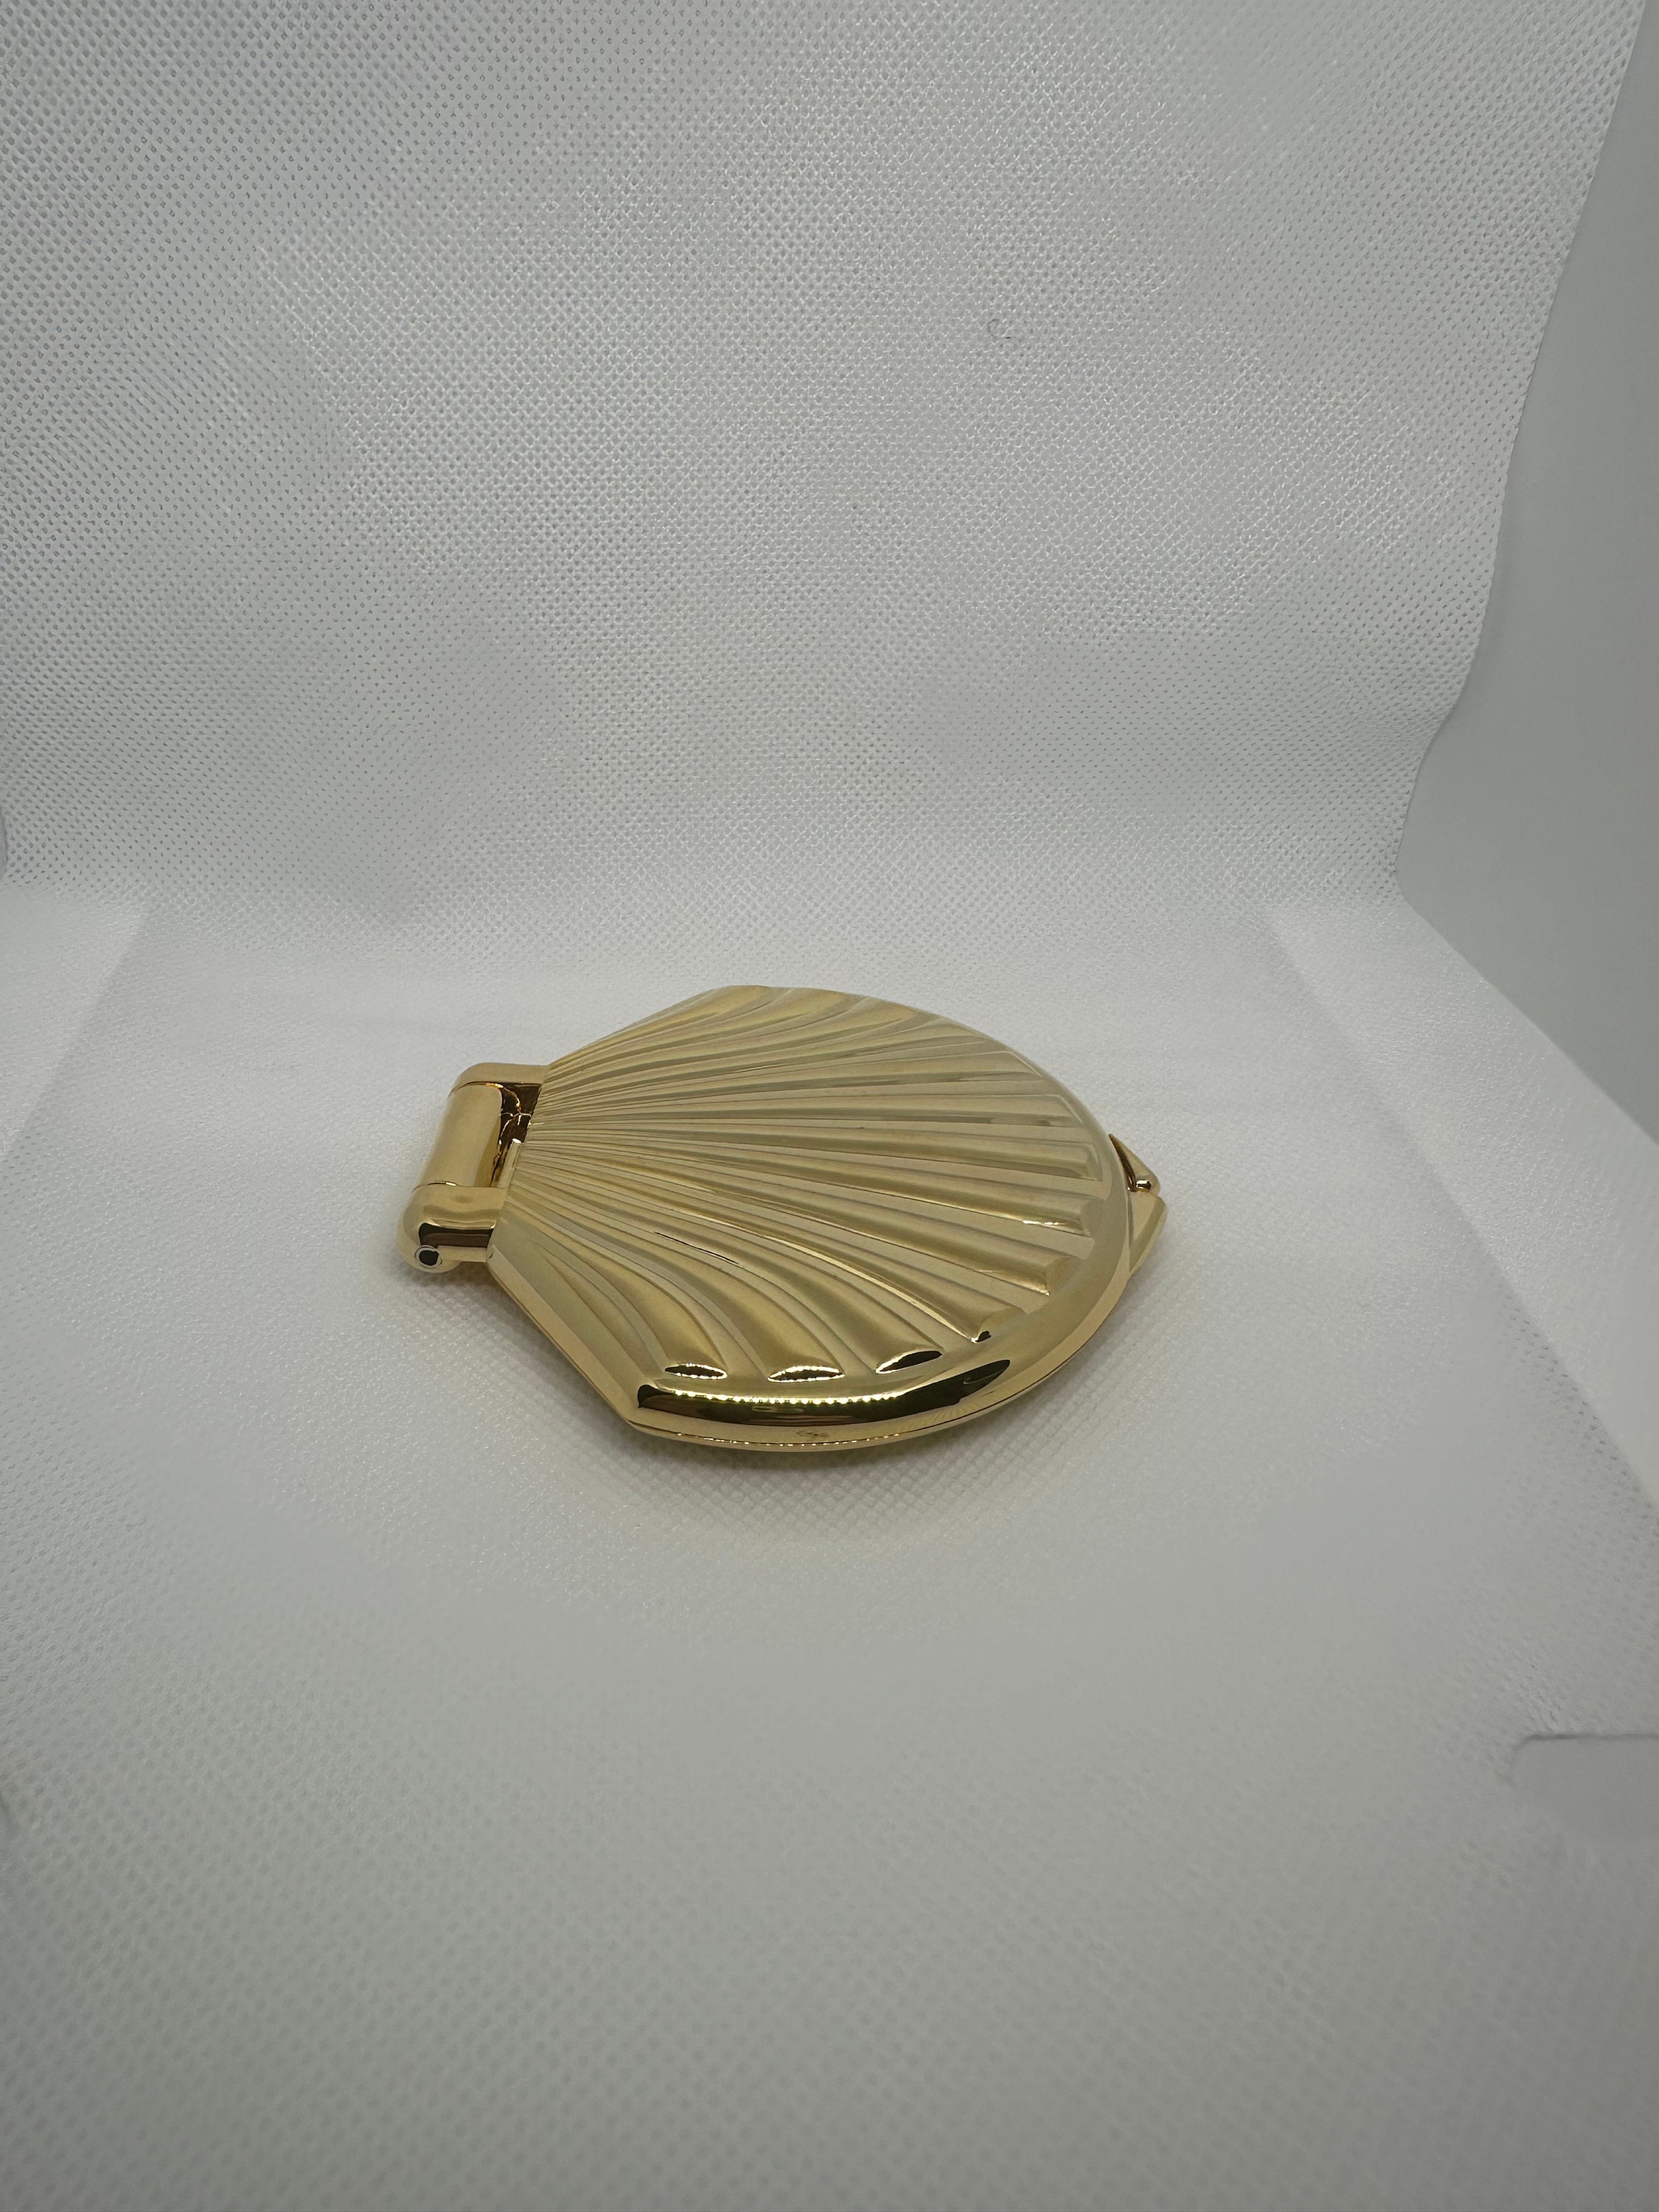 gold shell compact mirror